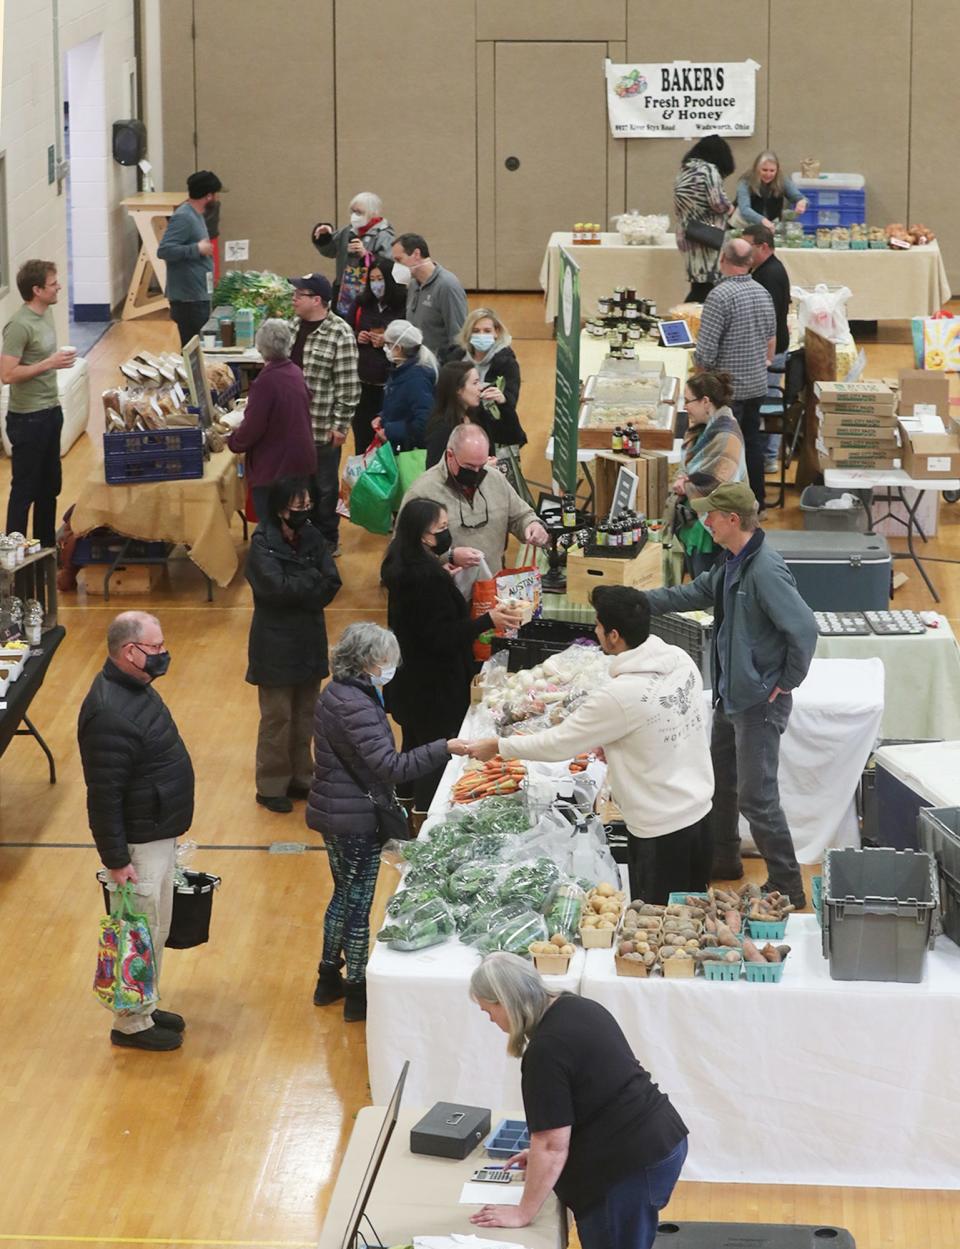 Shoppers look over the goods available at the Countryside Winter Farmers' Market at Old Trail School in Bath. The winter market will be open in 9 a.m. to noon March 19, April 2, April 16 and April 30.